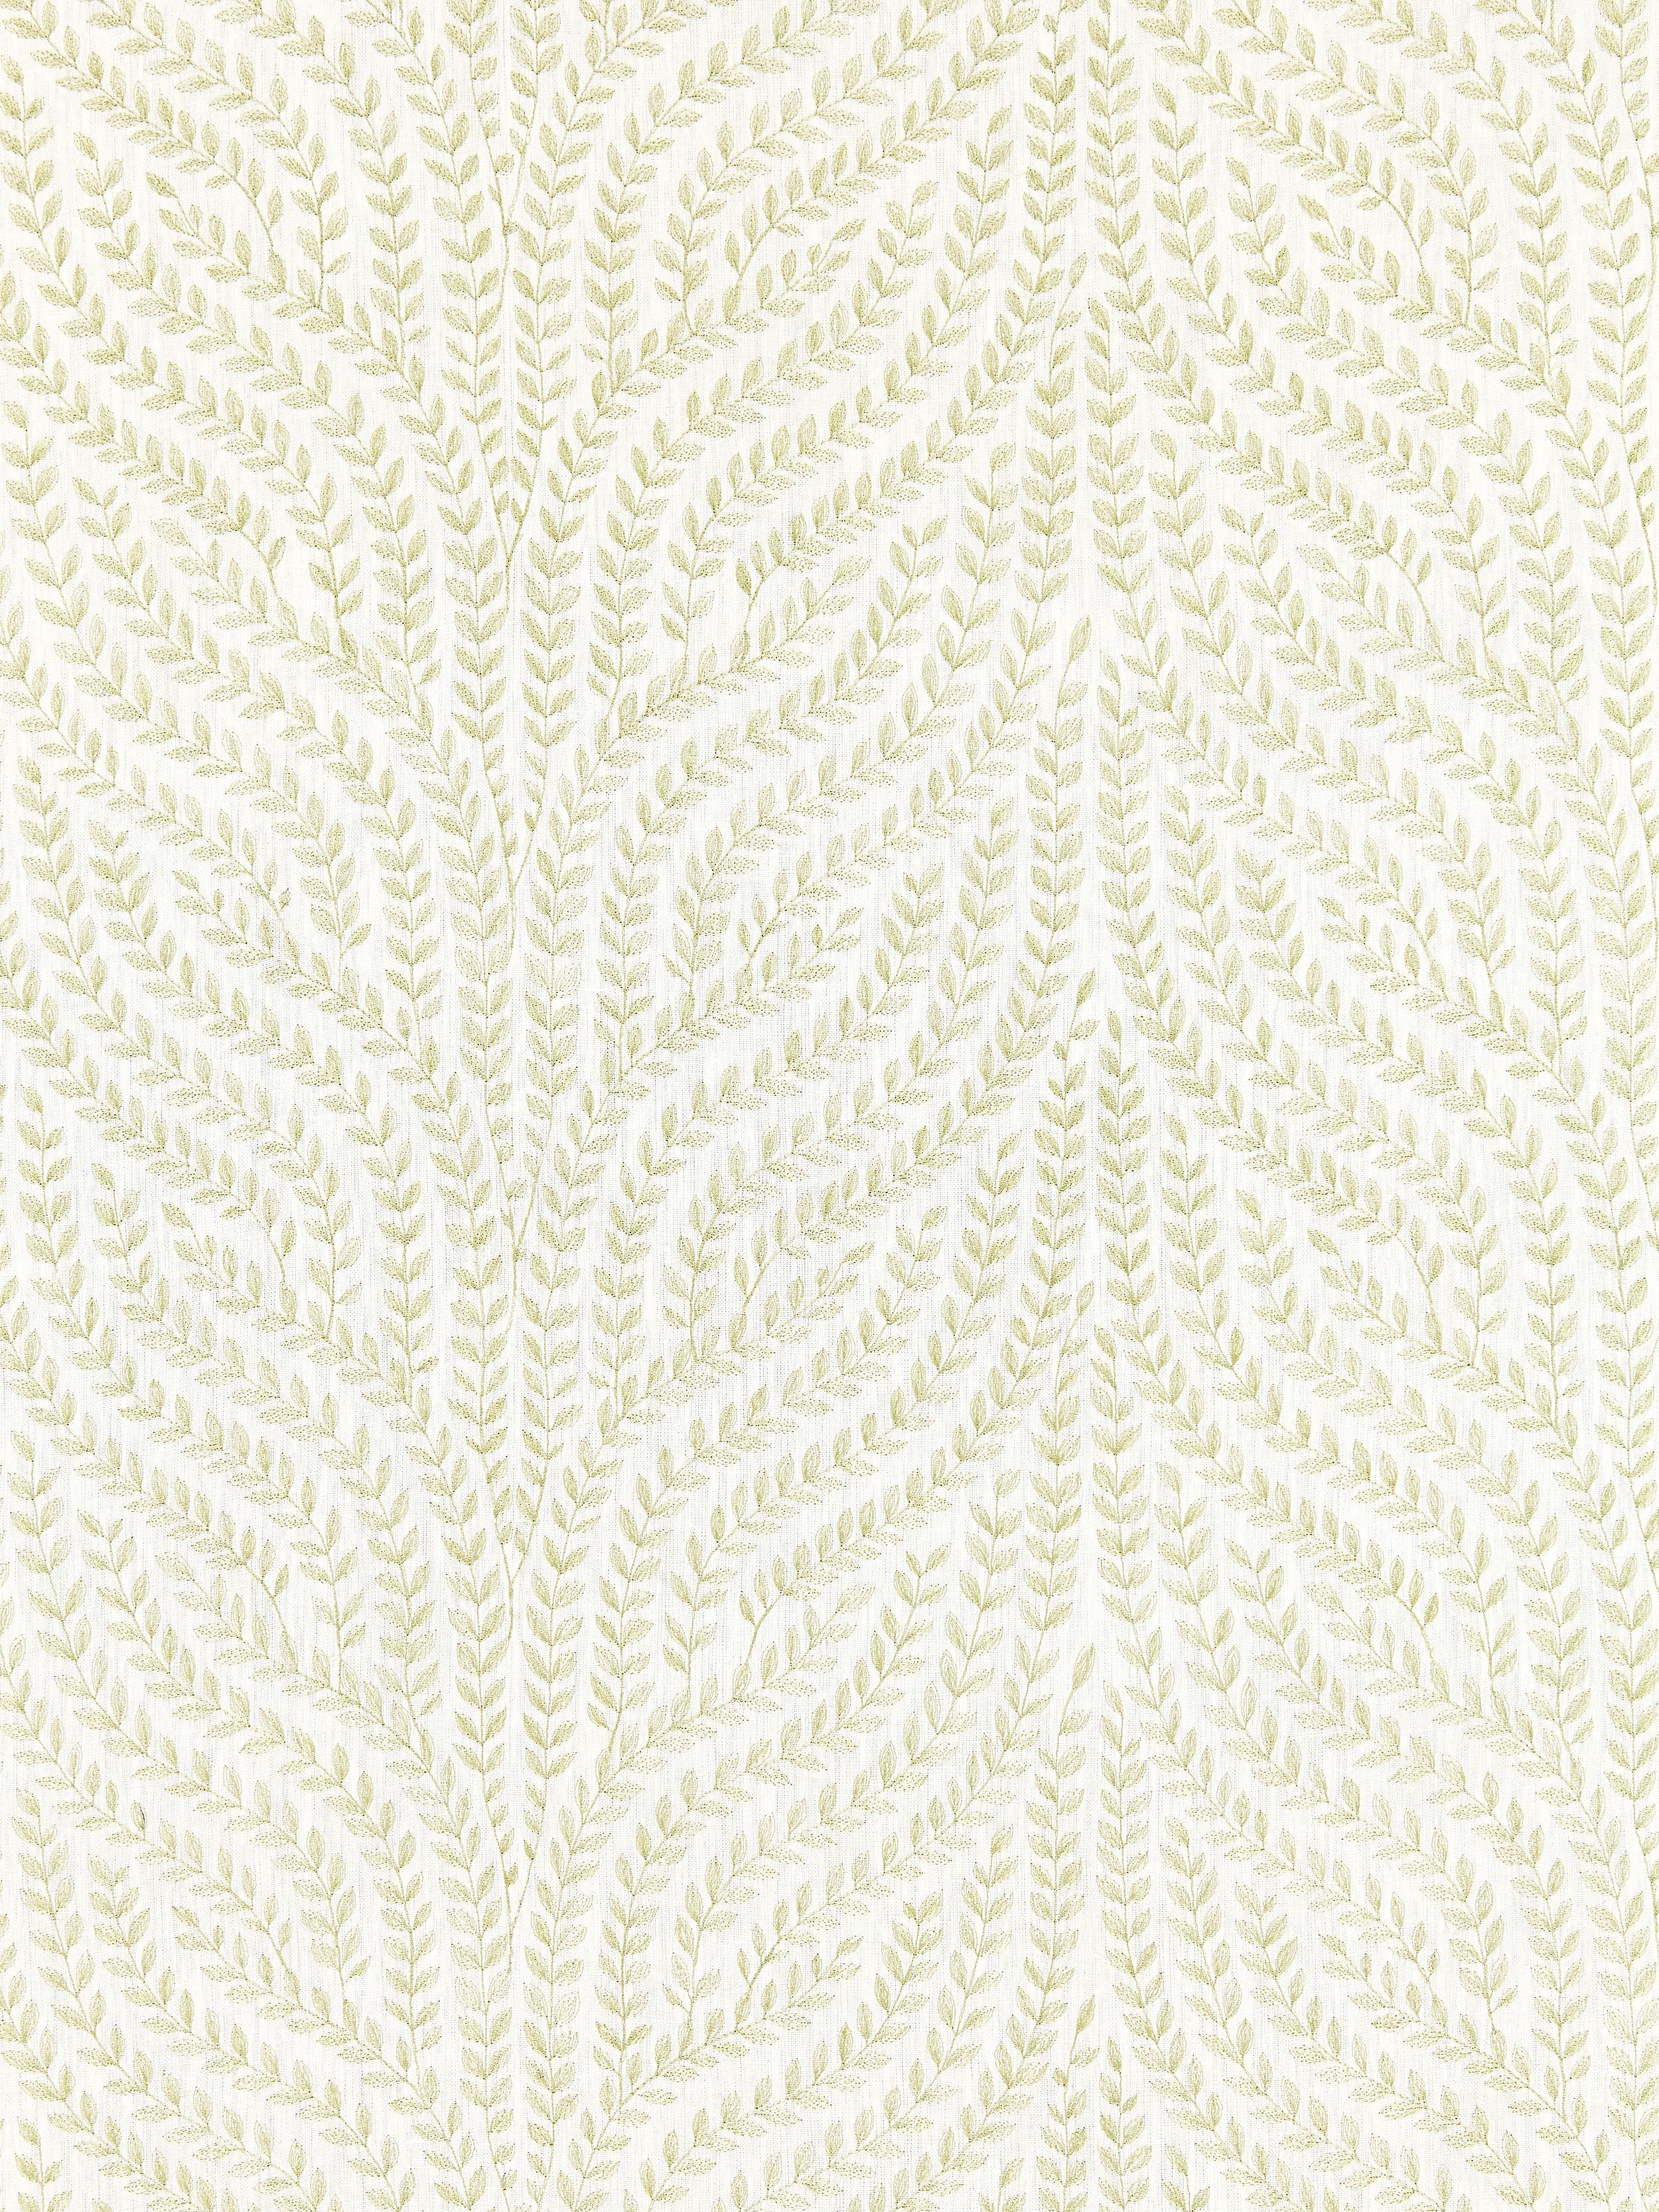 Willow Vine Embroidery fabric in celery color - pattern number SC 000227125 - by Scalamandre in the Scalamandre Fabrics Book 1 collection